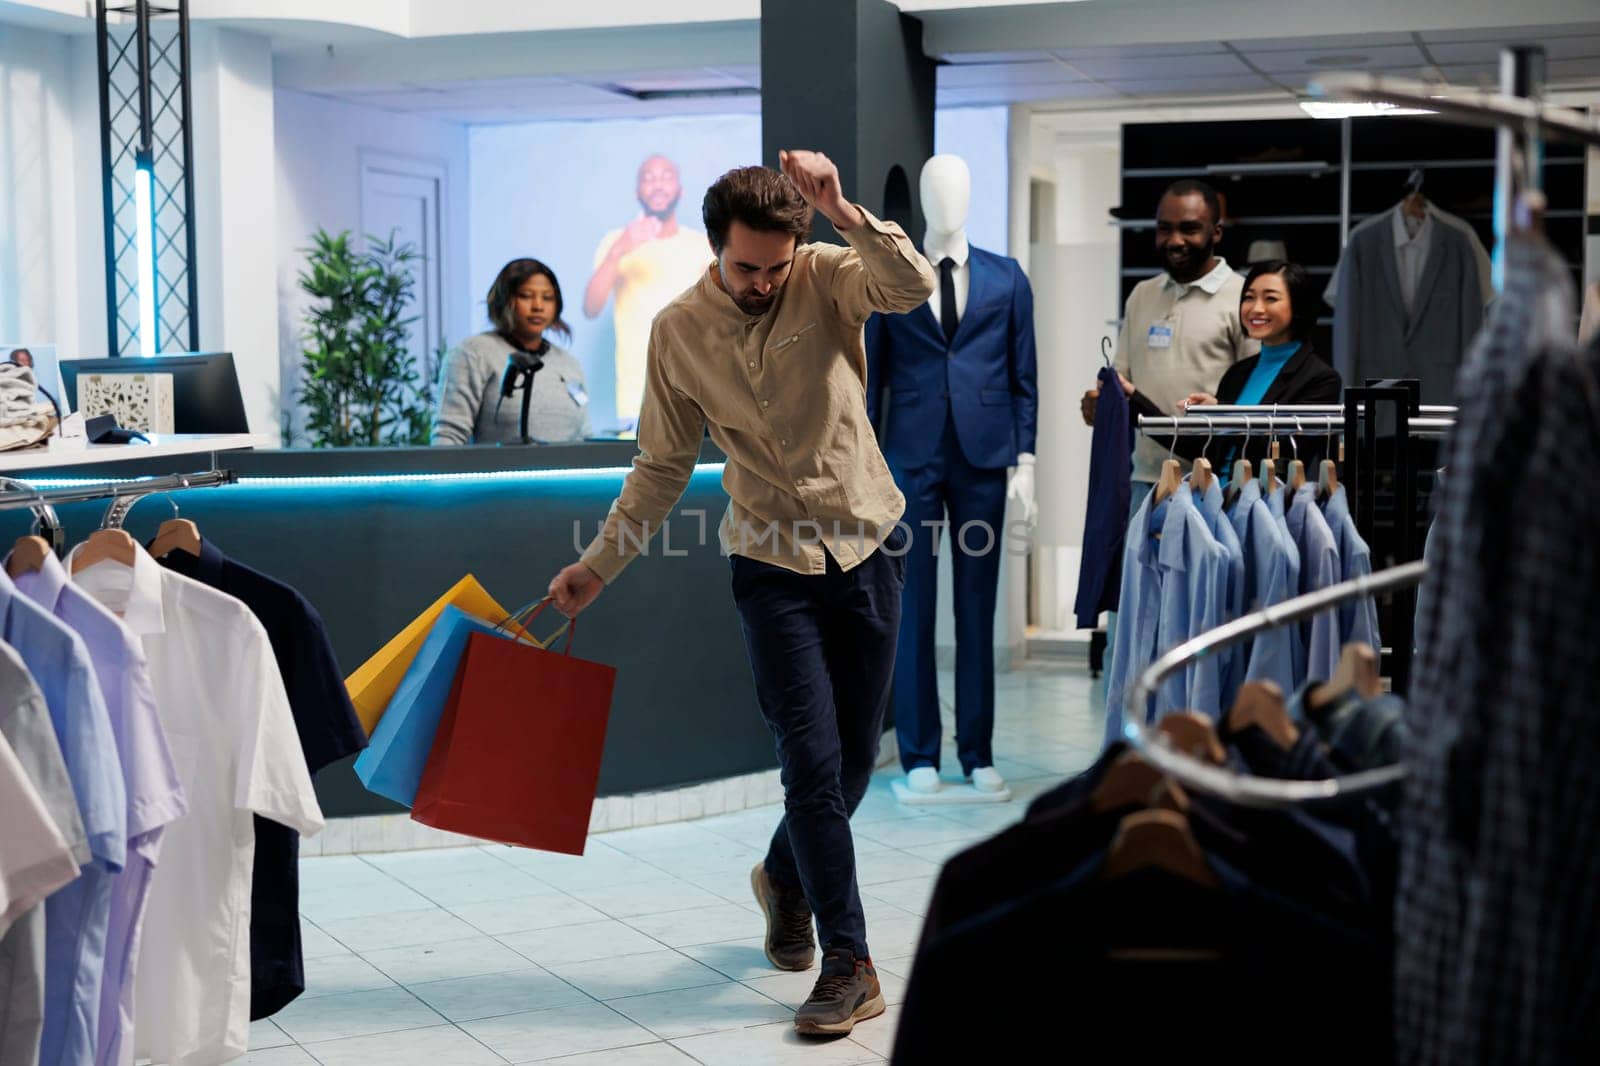 Cheerful man holding apparel purchase bags and dancing while shopping in clothing store. Department mall fashion boutique customer with packages making body moves to music